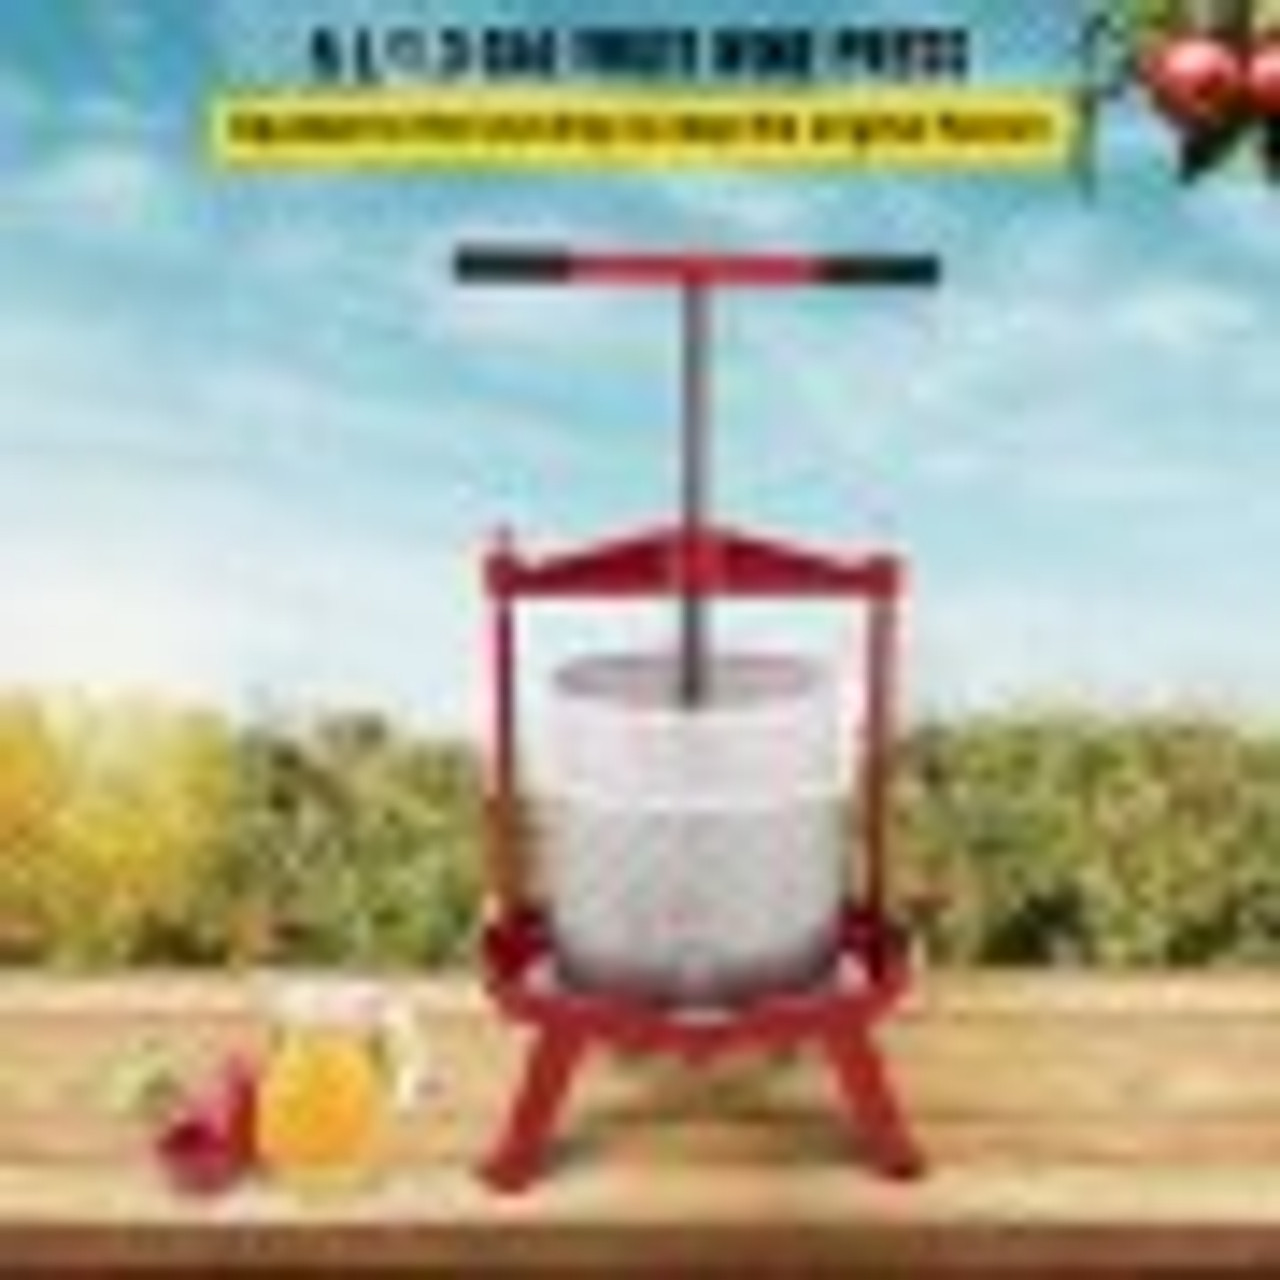 Fruit Wine Press, 1.3Gal/5L, Cast Iron Manual Grape Presser for Wine Making, Cider Tincture Vegetables Honey Olive Oil Press with Stainless Steel Hollow Basket T-Handle 0.1" Thick Plate 3 Feet